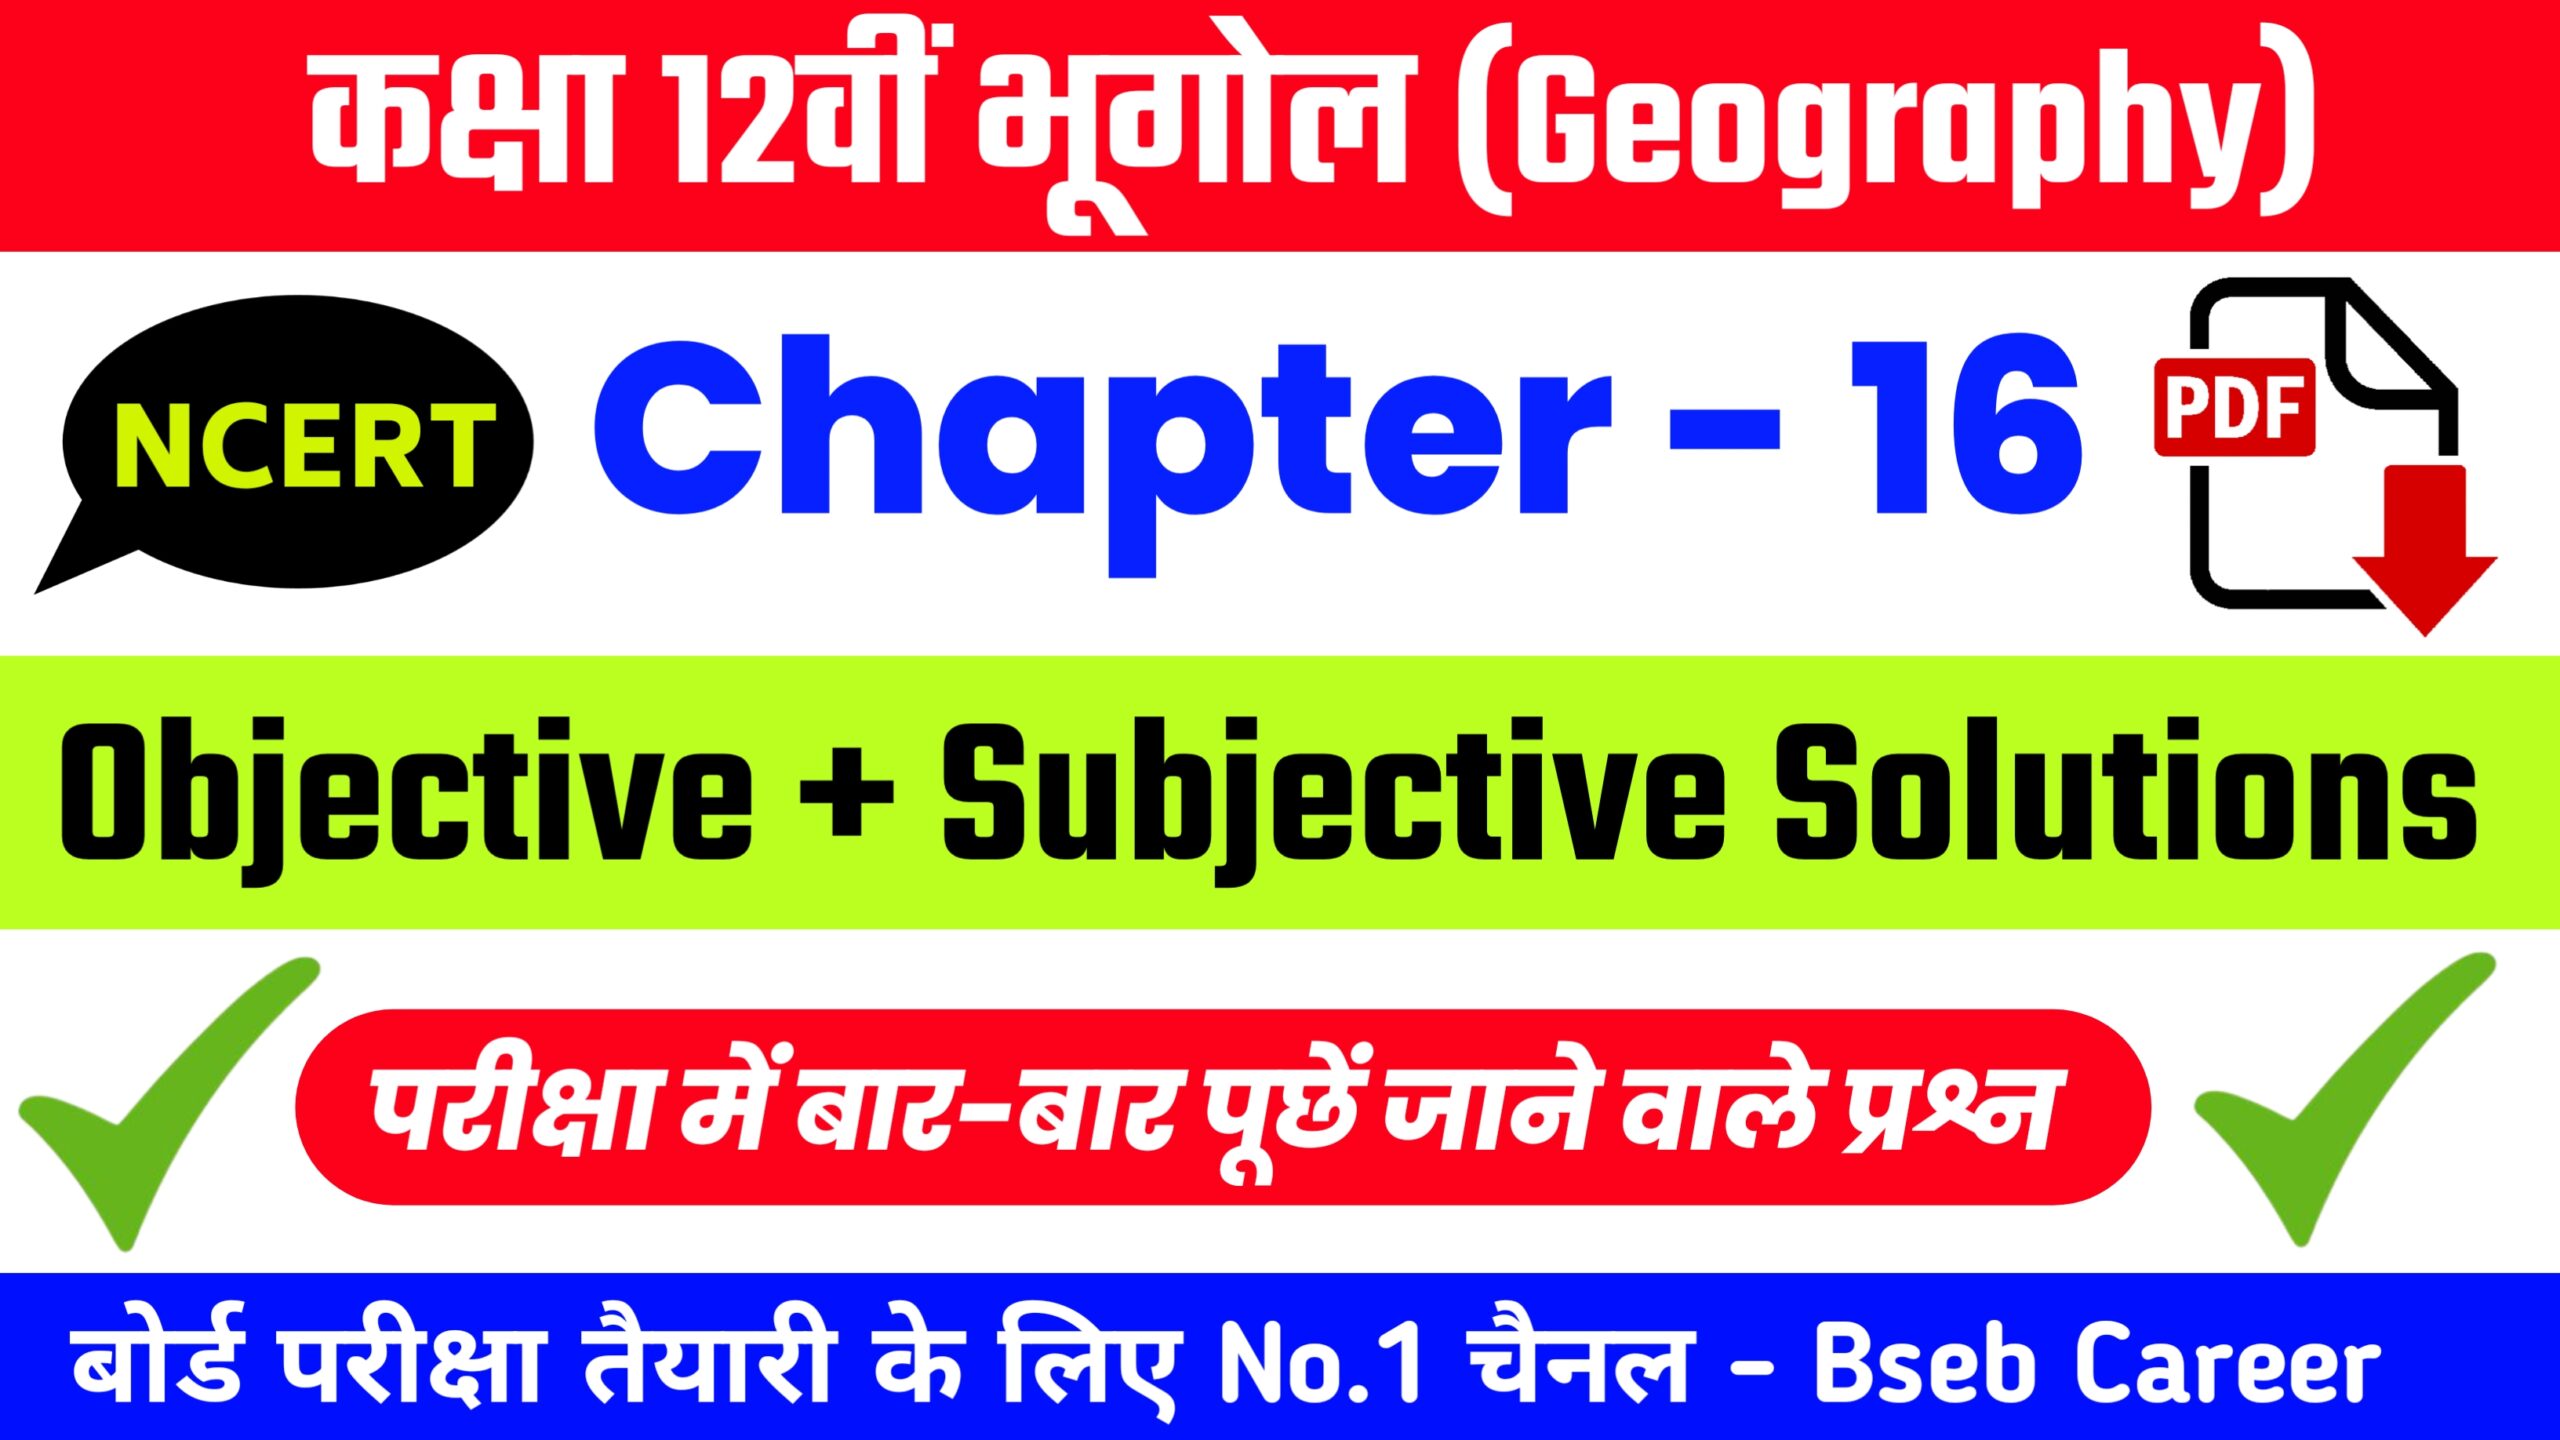 Class 12th Geography Chapter 16